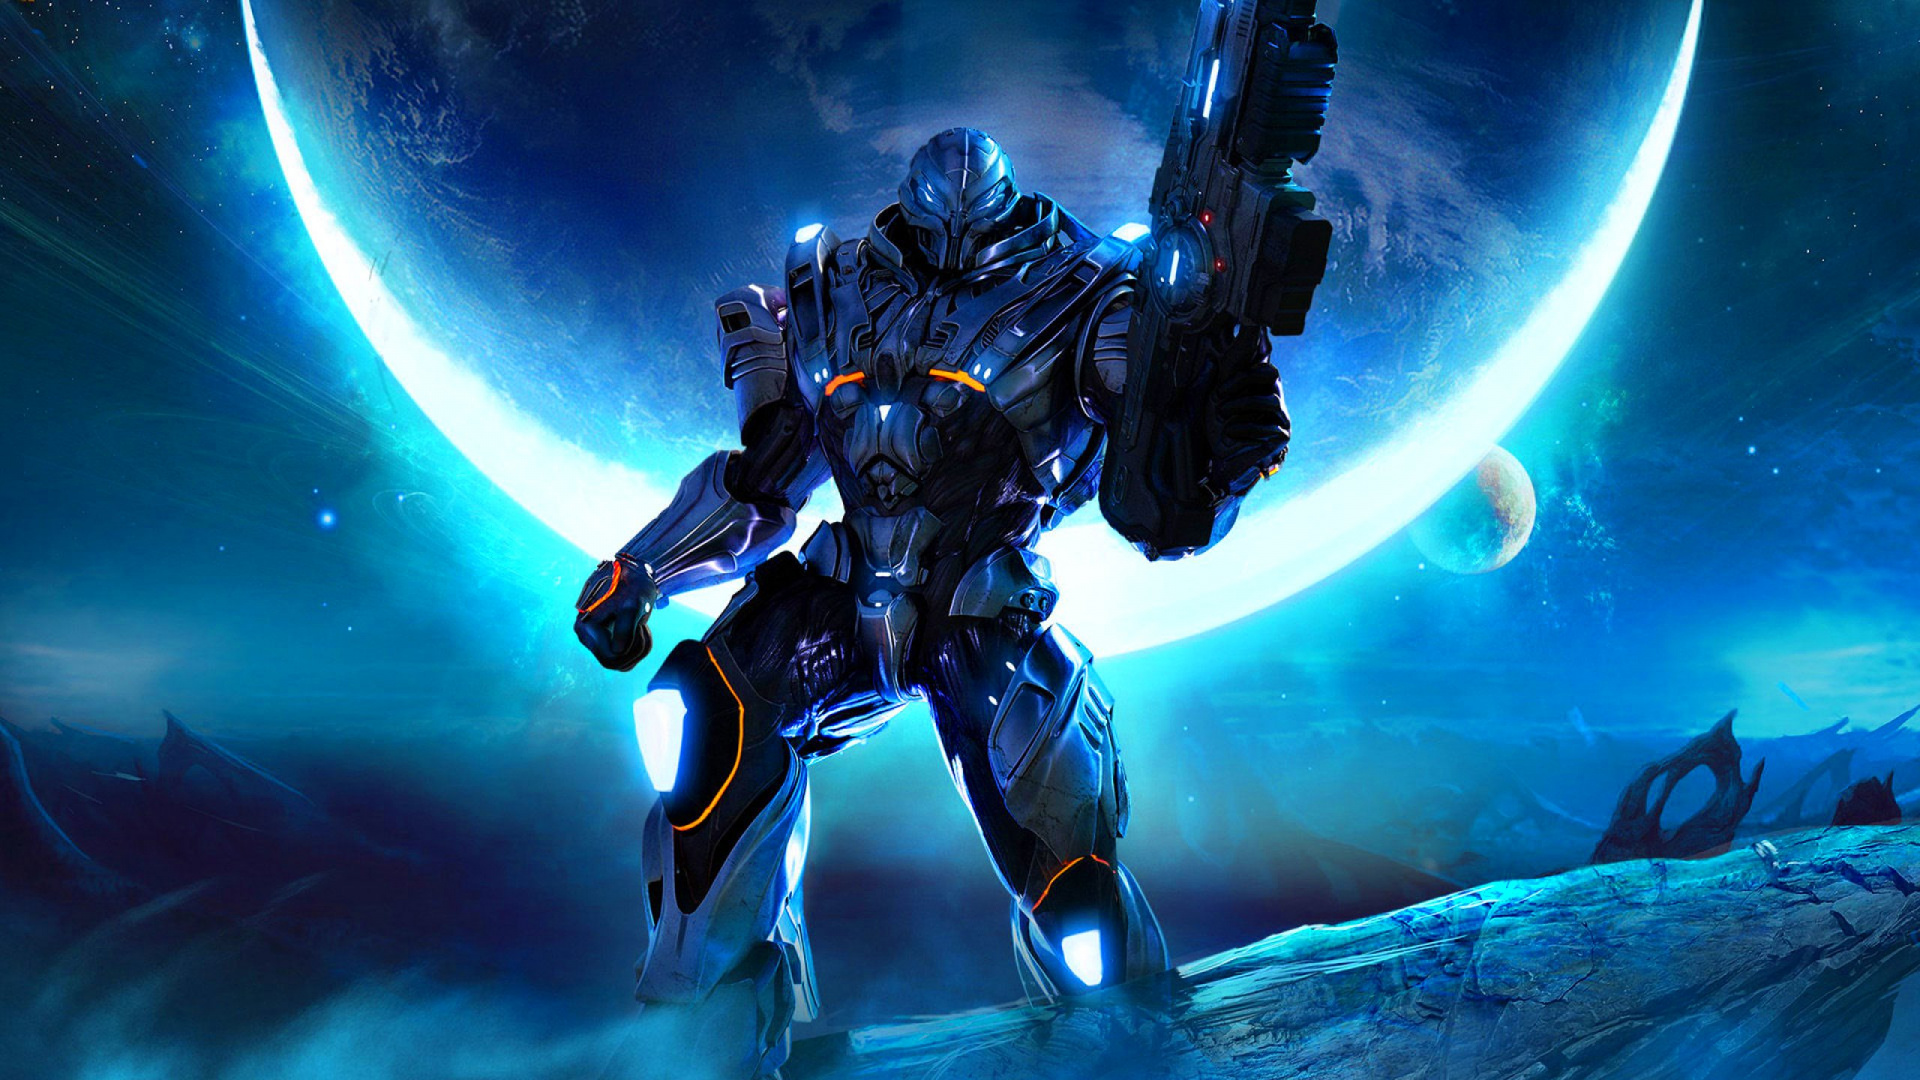 Mecha, Space, pc Game, Power Armor Video Games, Extreme Sport. Wallpaper in 1920x1080 Resolution